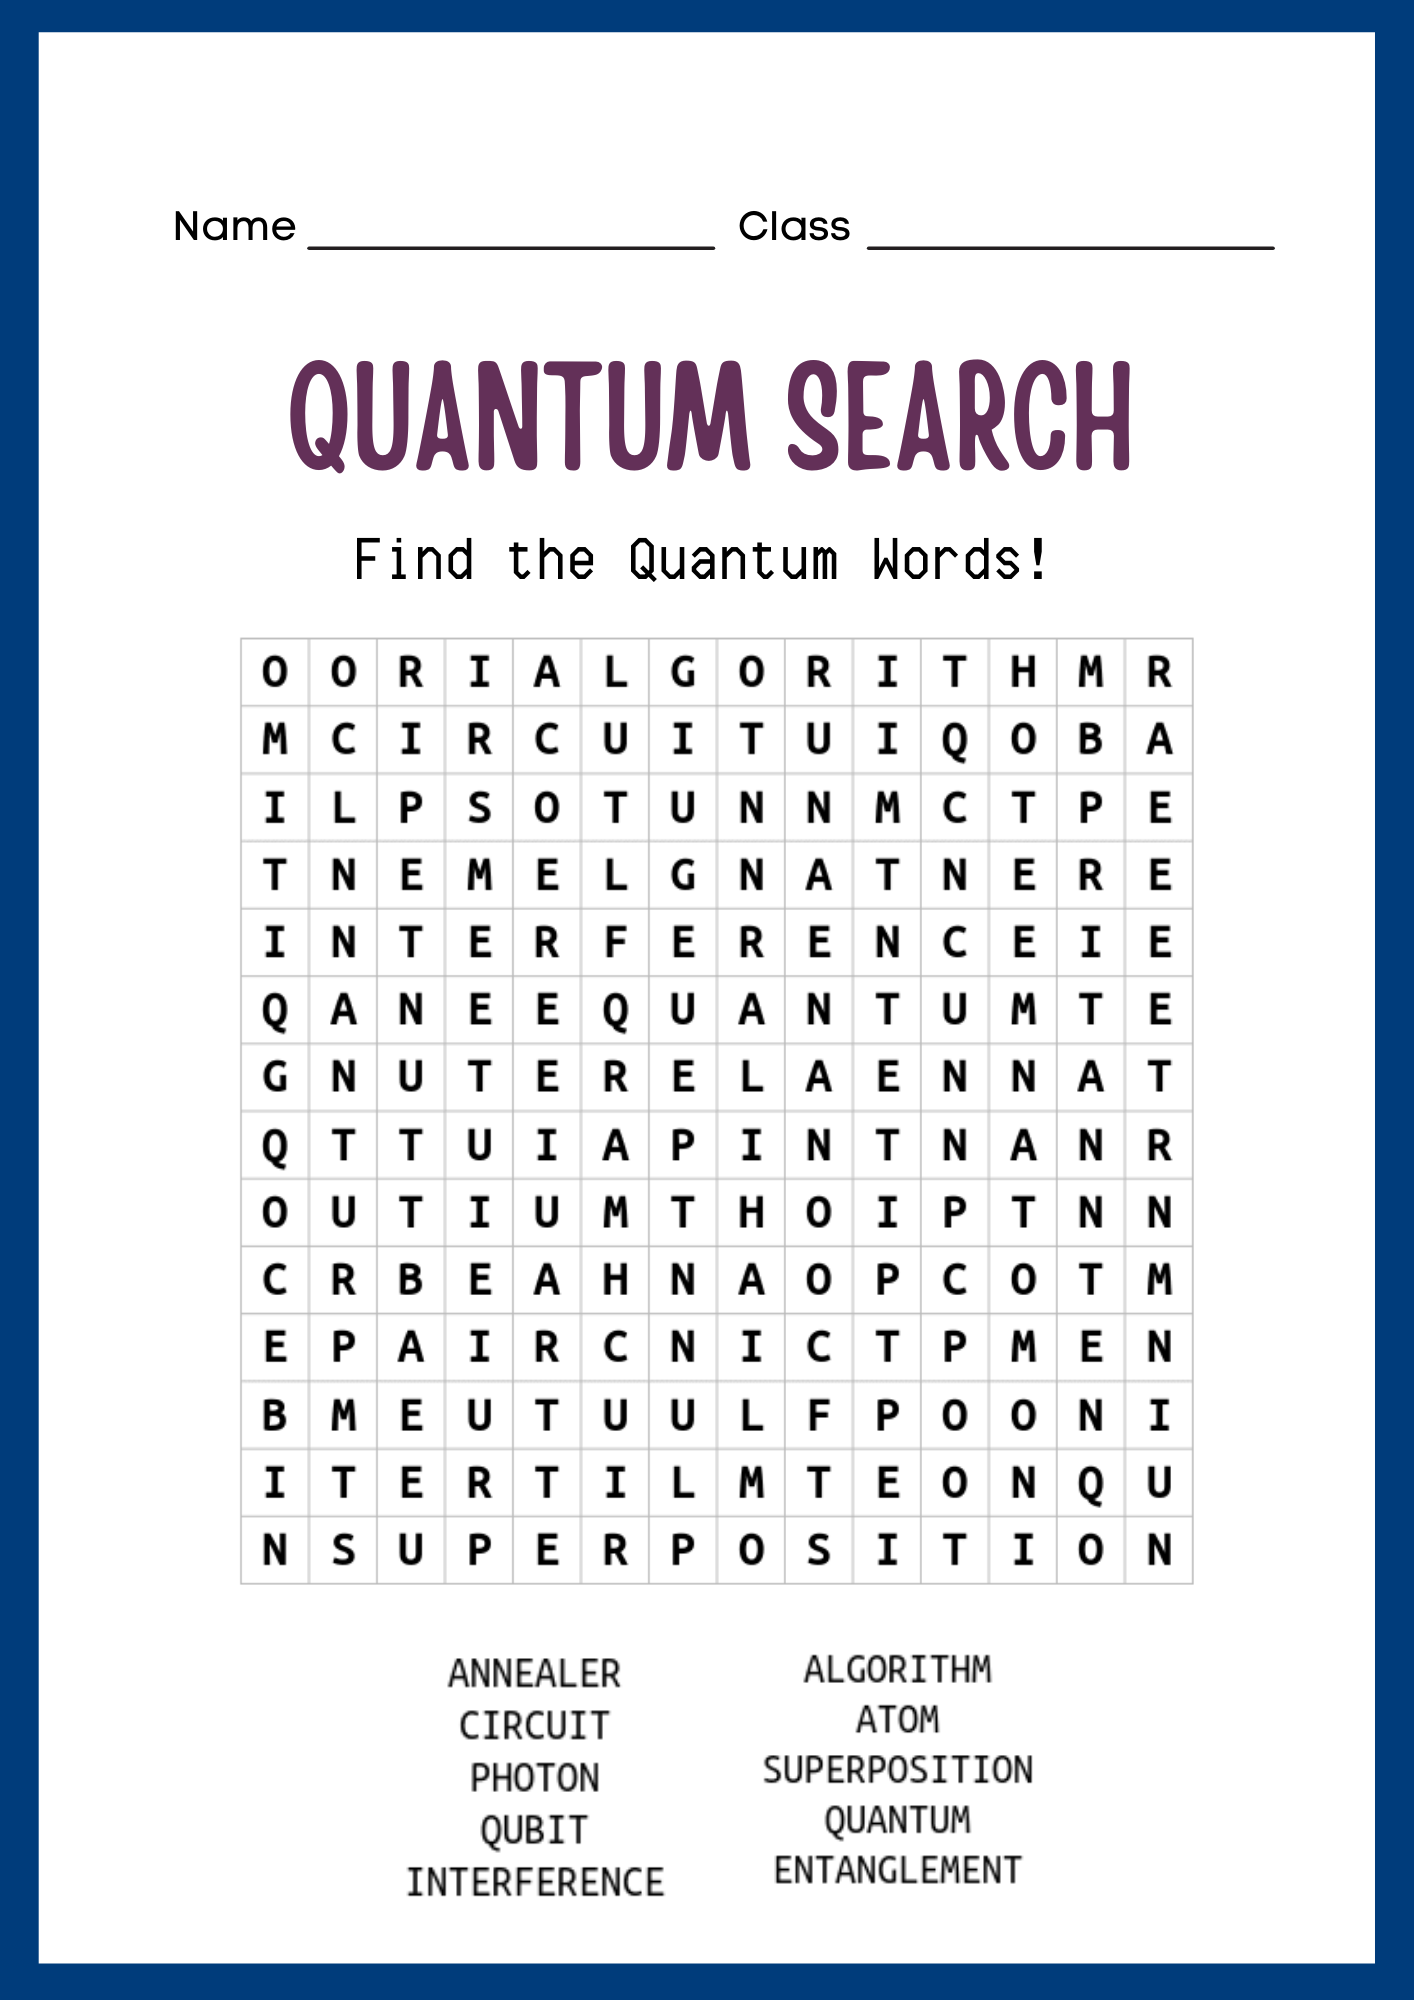 qsearch